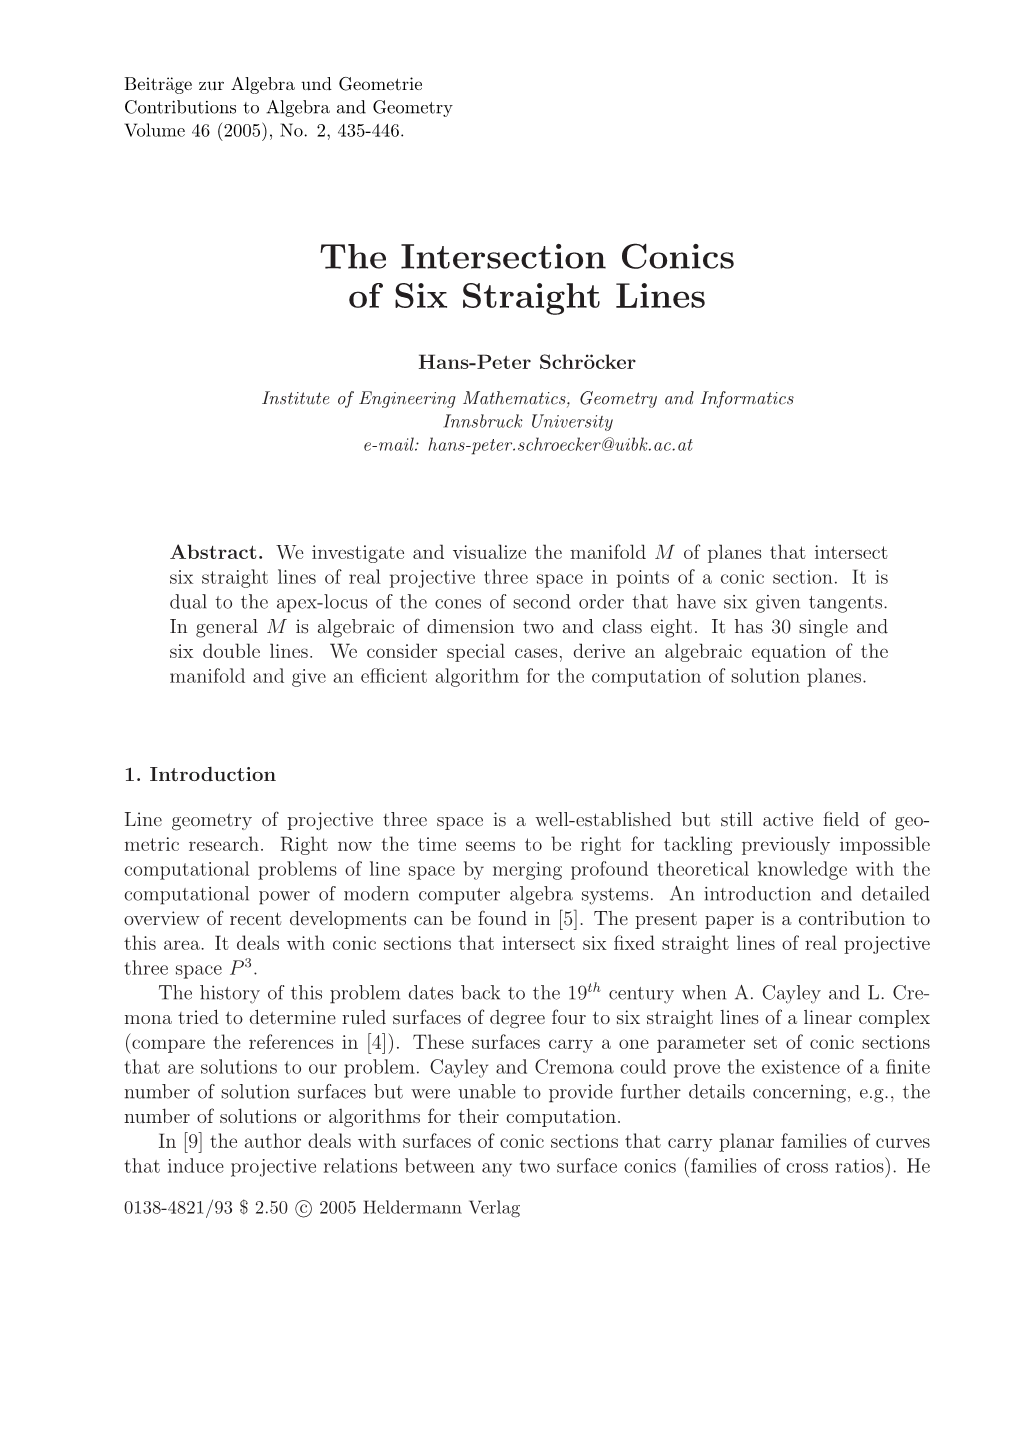 The Intersection Conics of Six Straight Lines